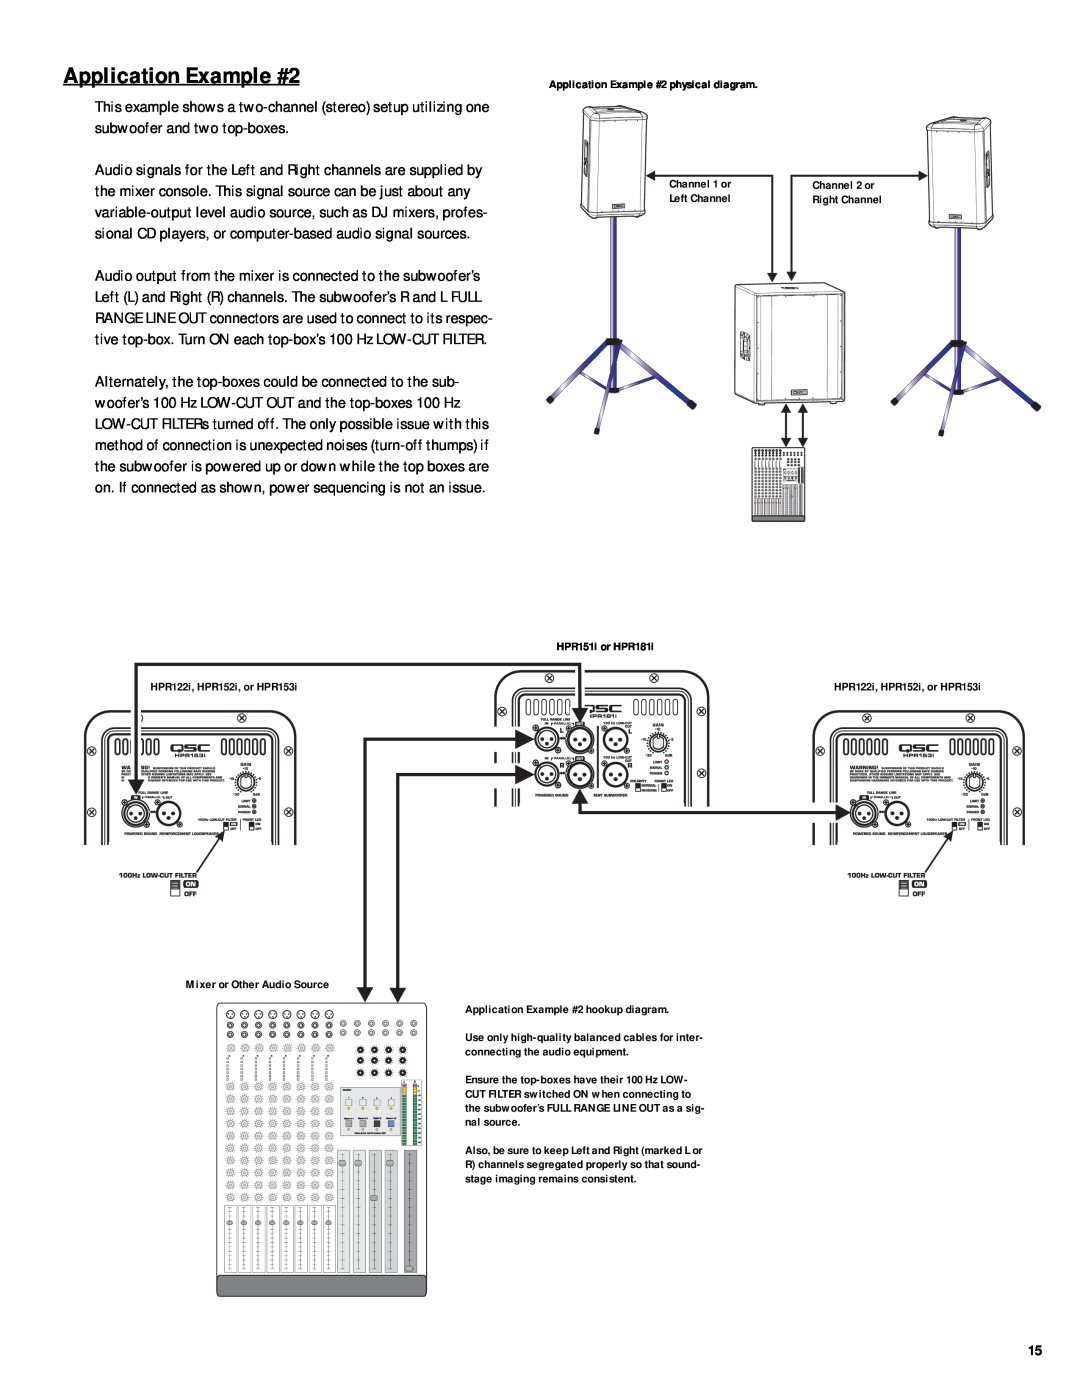 QSC Audio HPR122i, HPR152i, HPR153i, HPR151i, HPR181i Application Example #2 physical diagram, HPR151i or HPR181i 